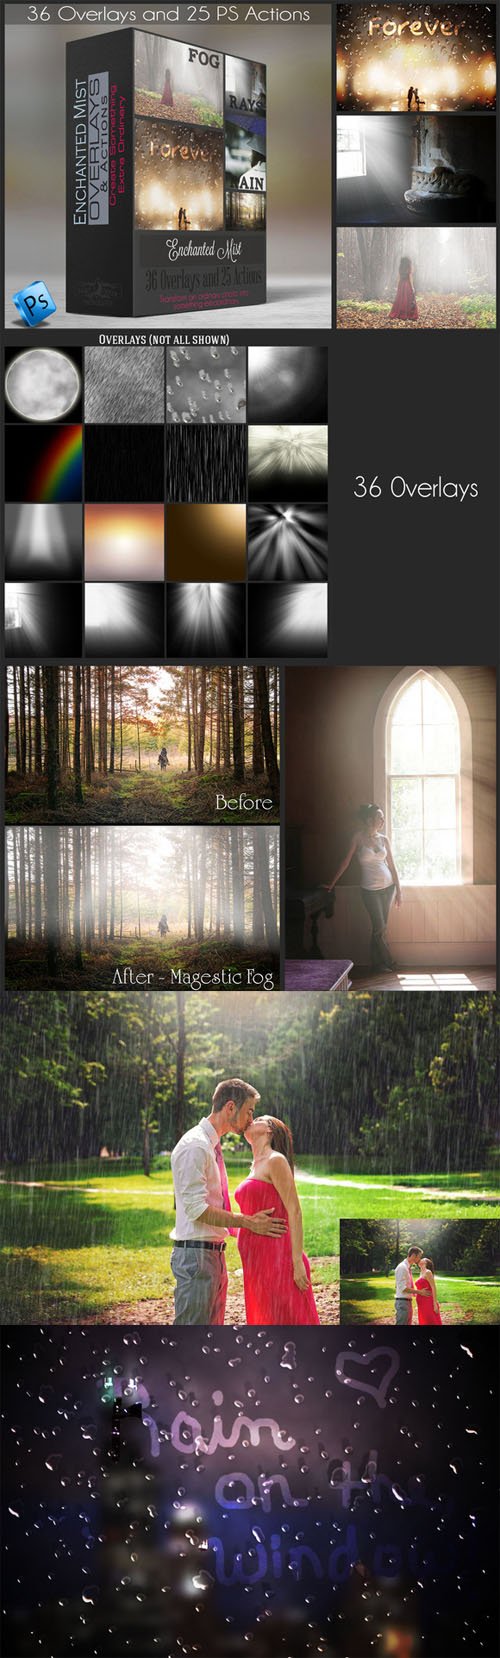 Enchanted Mist - Actions & Overlays - CM 92256